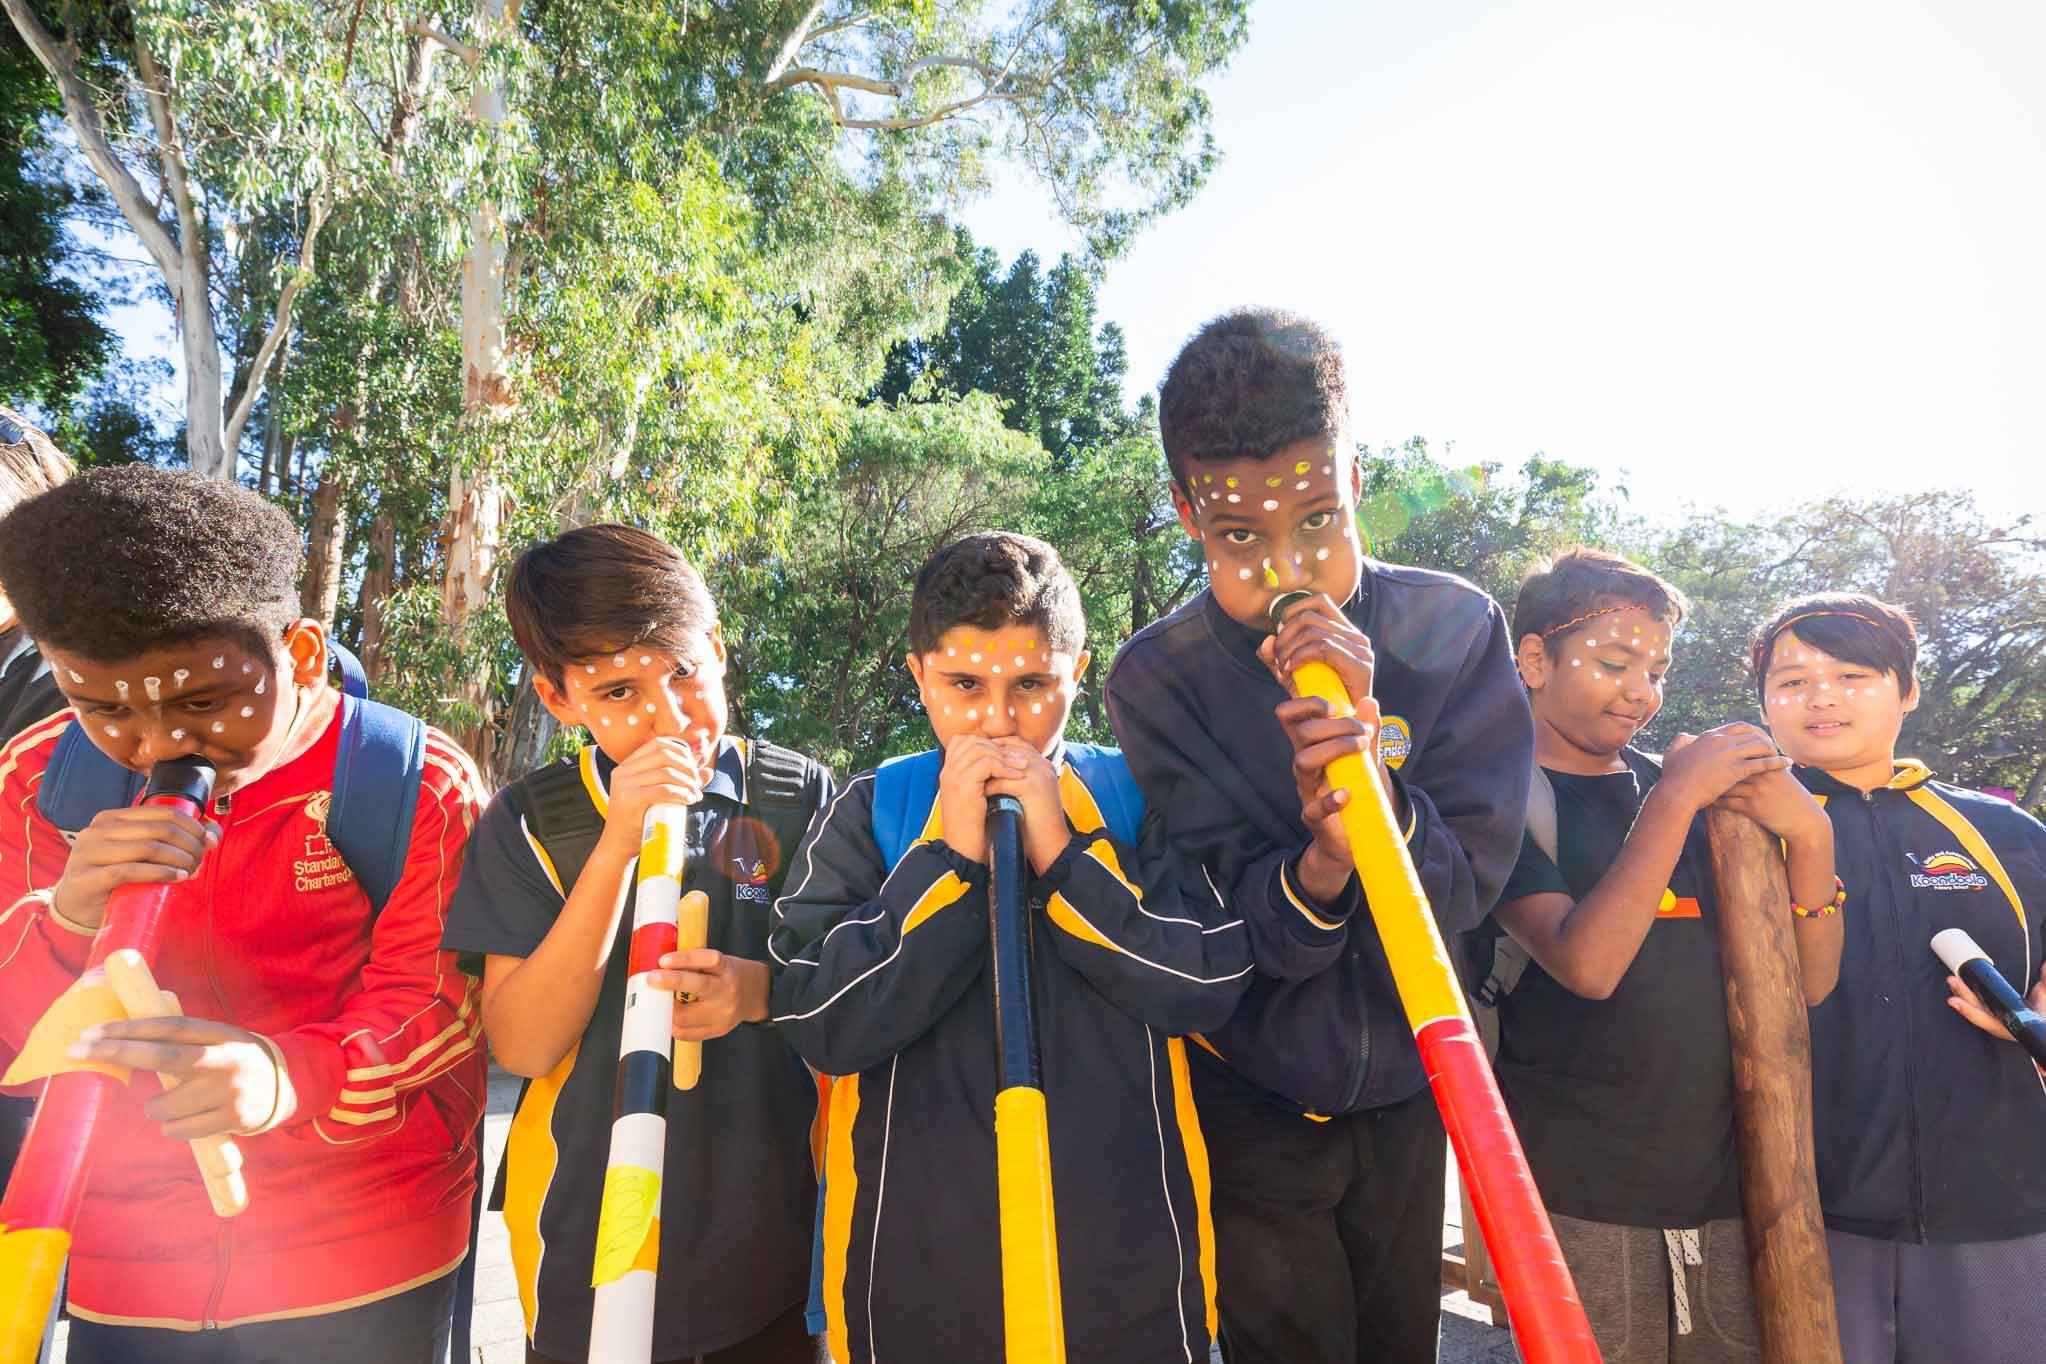 six primary school students engaged in an indigenous arts learning music lesson in didgeridoo